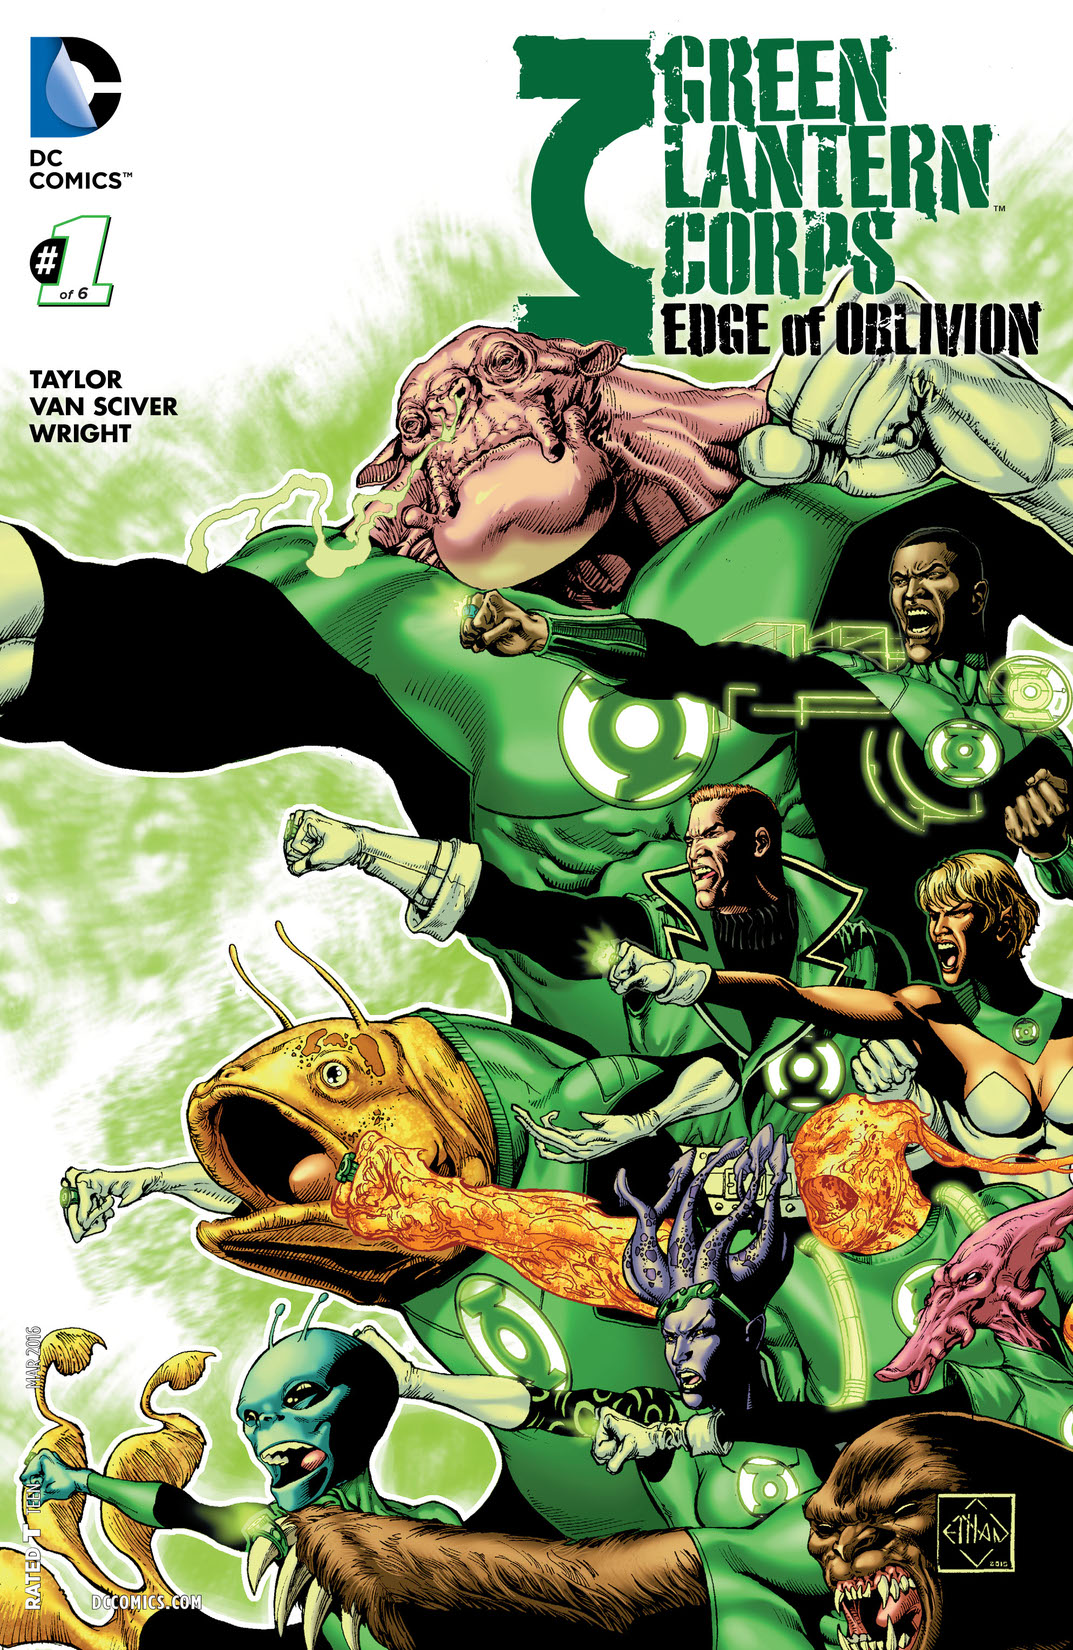 Green Lantern Corps: Edge of Oblivion #1 preview images